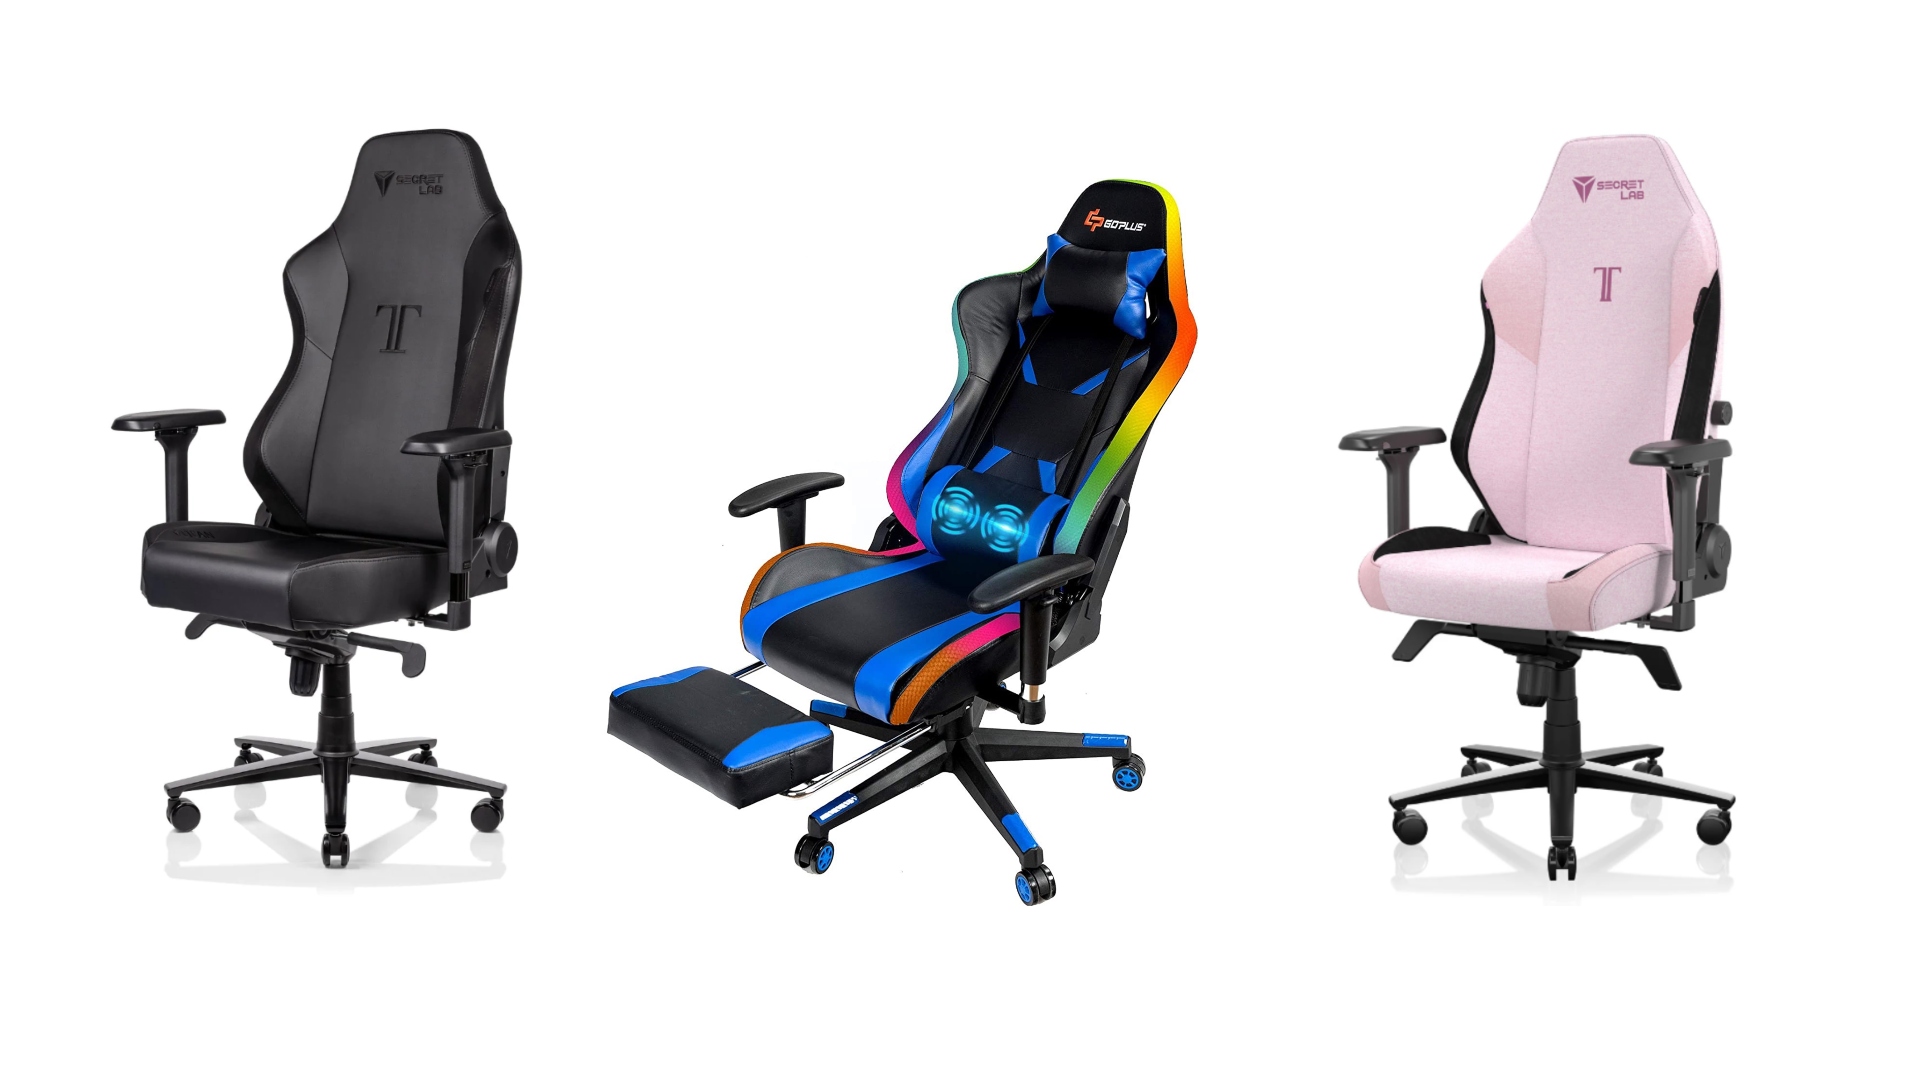 How to match your gaming chair to your set-up